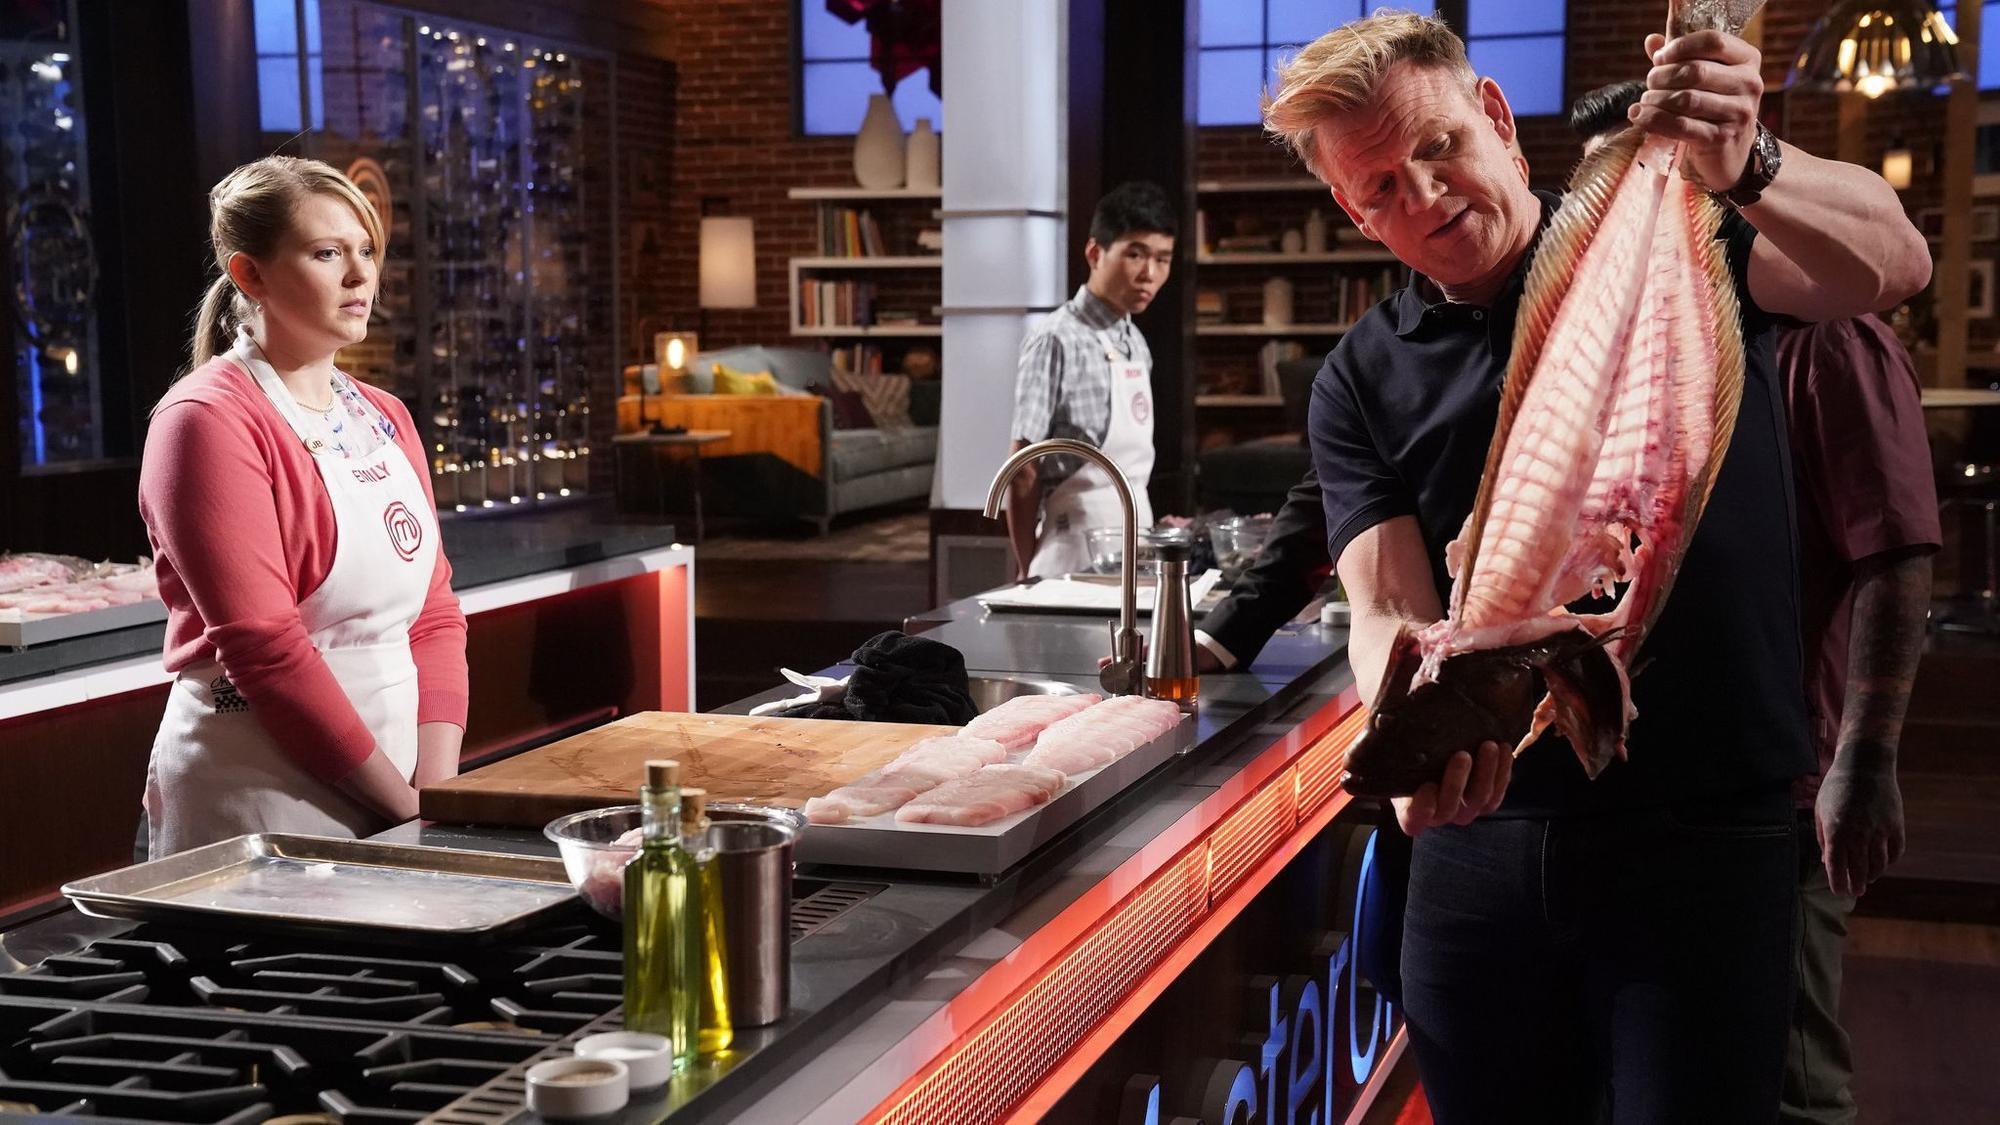 An image from Masterchef USA. Gordon Ramsay is holding the carcass of a fish. A contestant observes... horrified? At least intimidated.